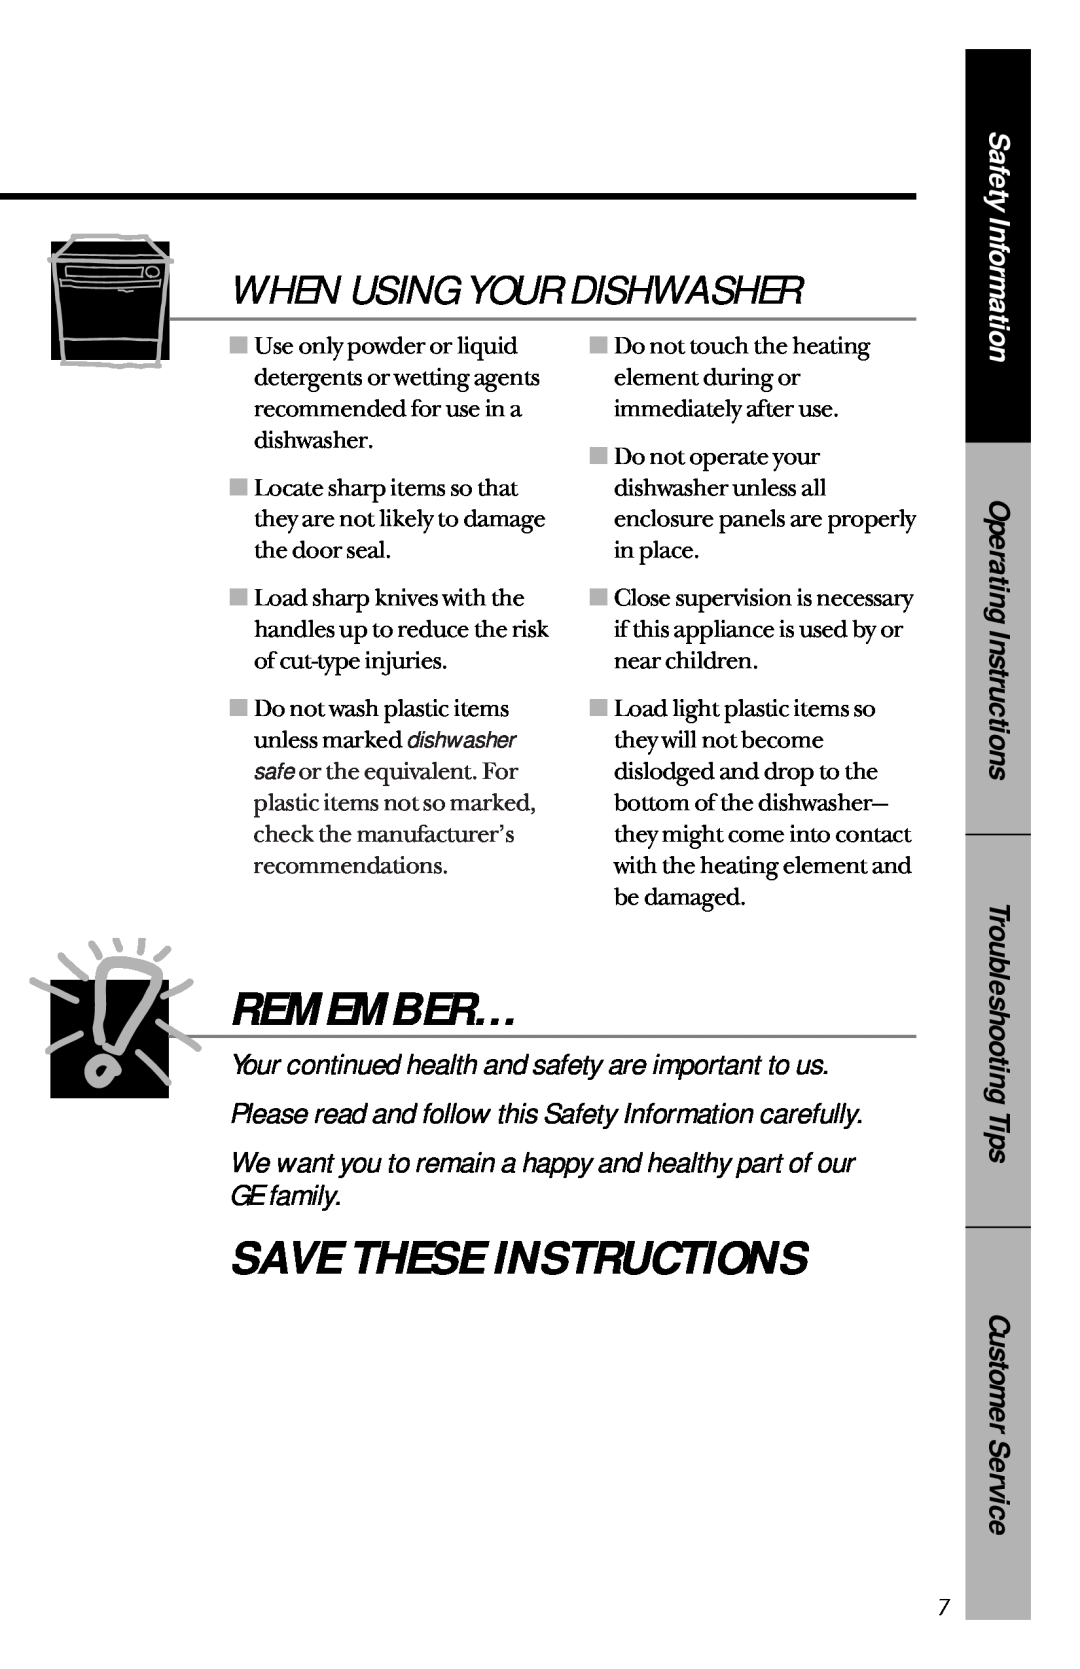 GE GSD4910 When Using Your Dishwasher, Operating Instructions, Customer Service, Remember…, Save These Instructions 